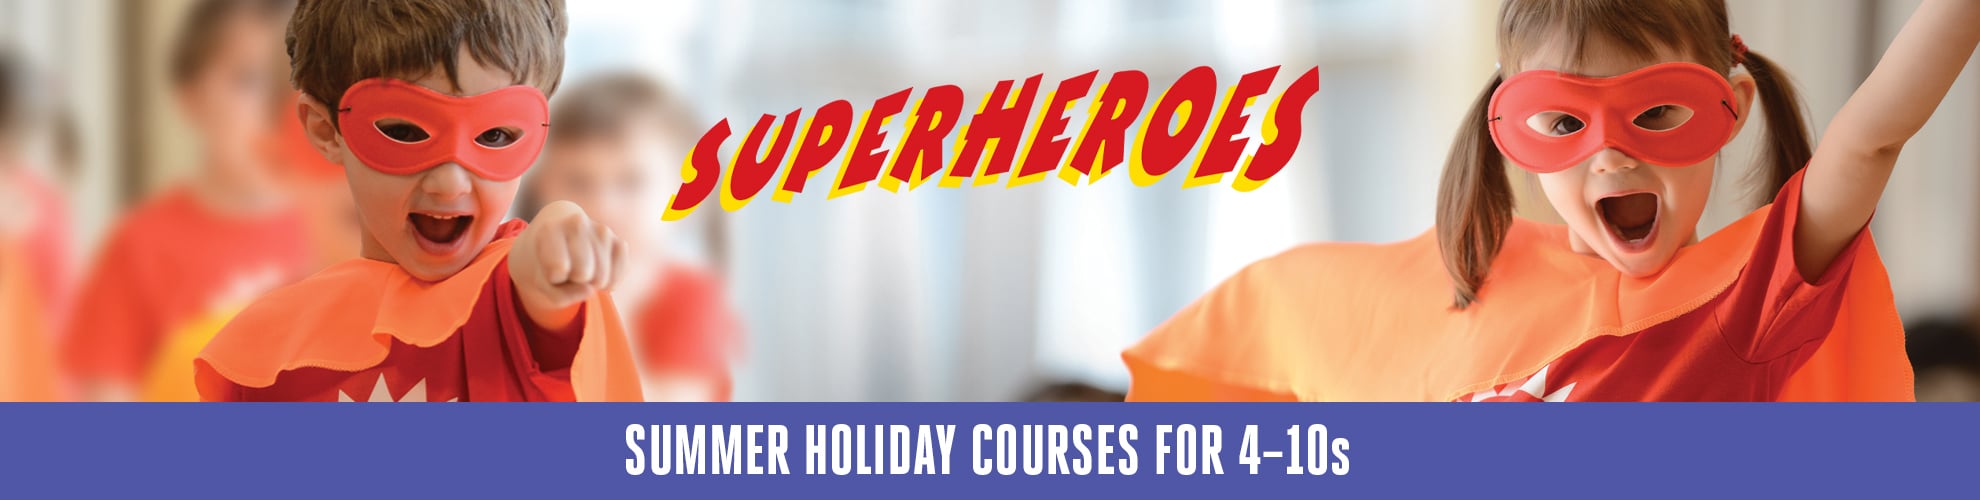 Join us for a holiday adventure with the Superheroes this July and August.